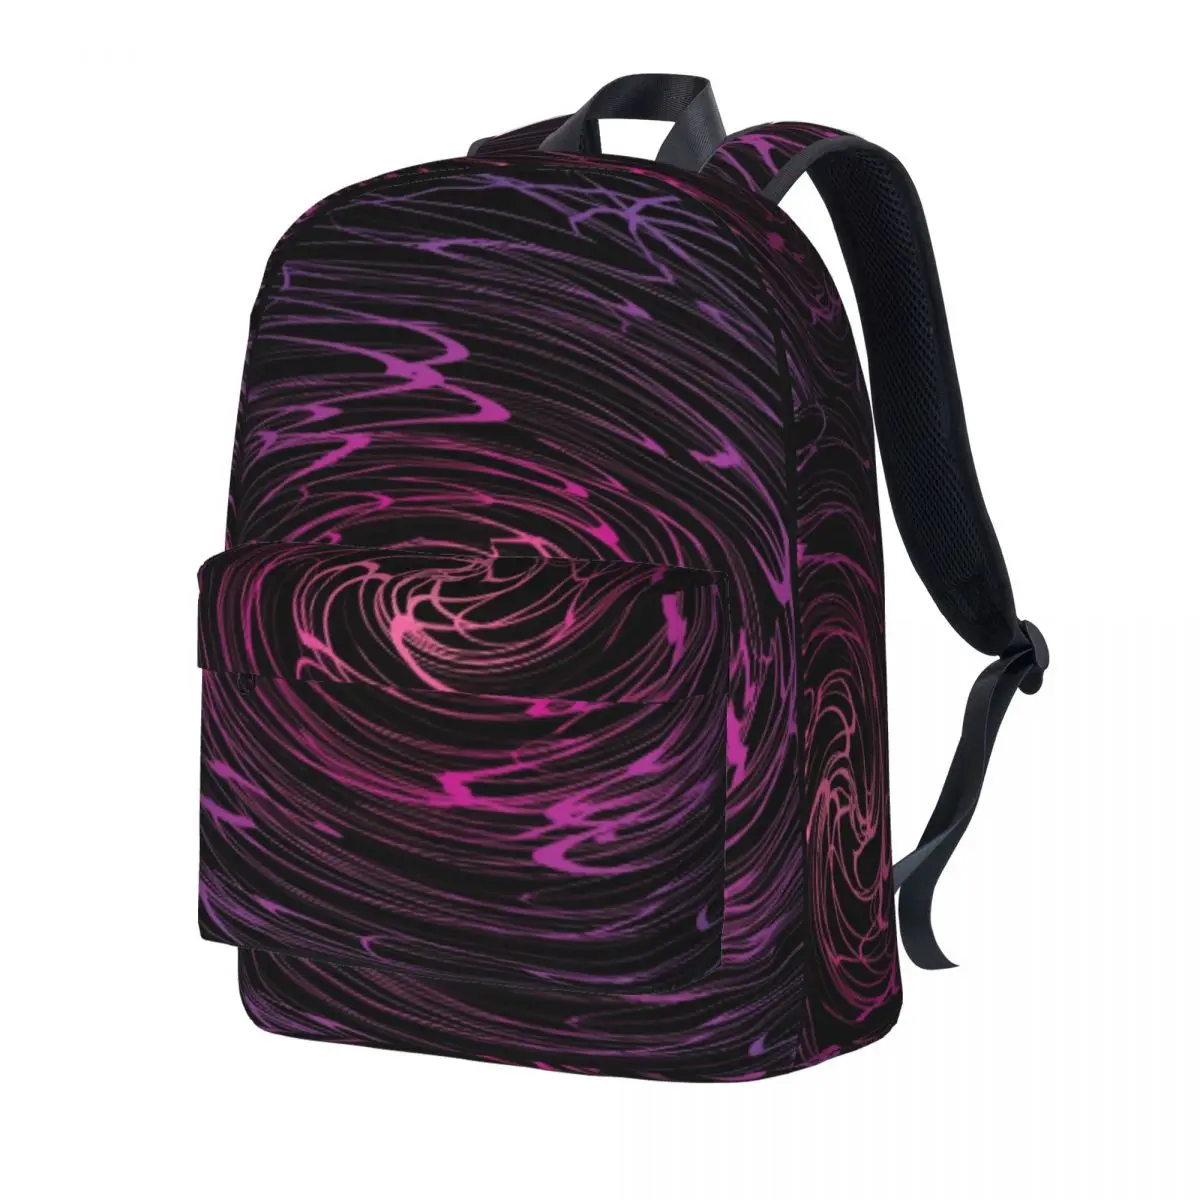 

Purple Shallow Water Backpack Multi-Colored Vortex Kawaii Backpacks College Lightweight High School Bags High Quality Rucksack